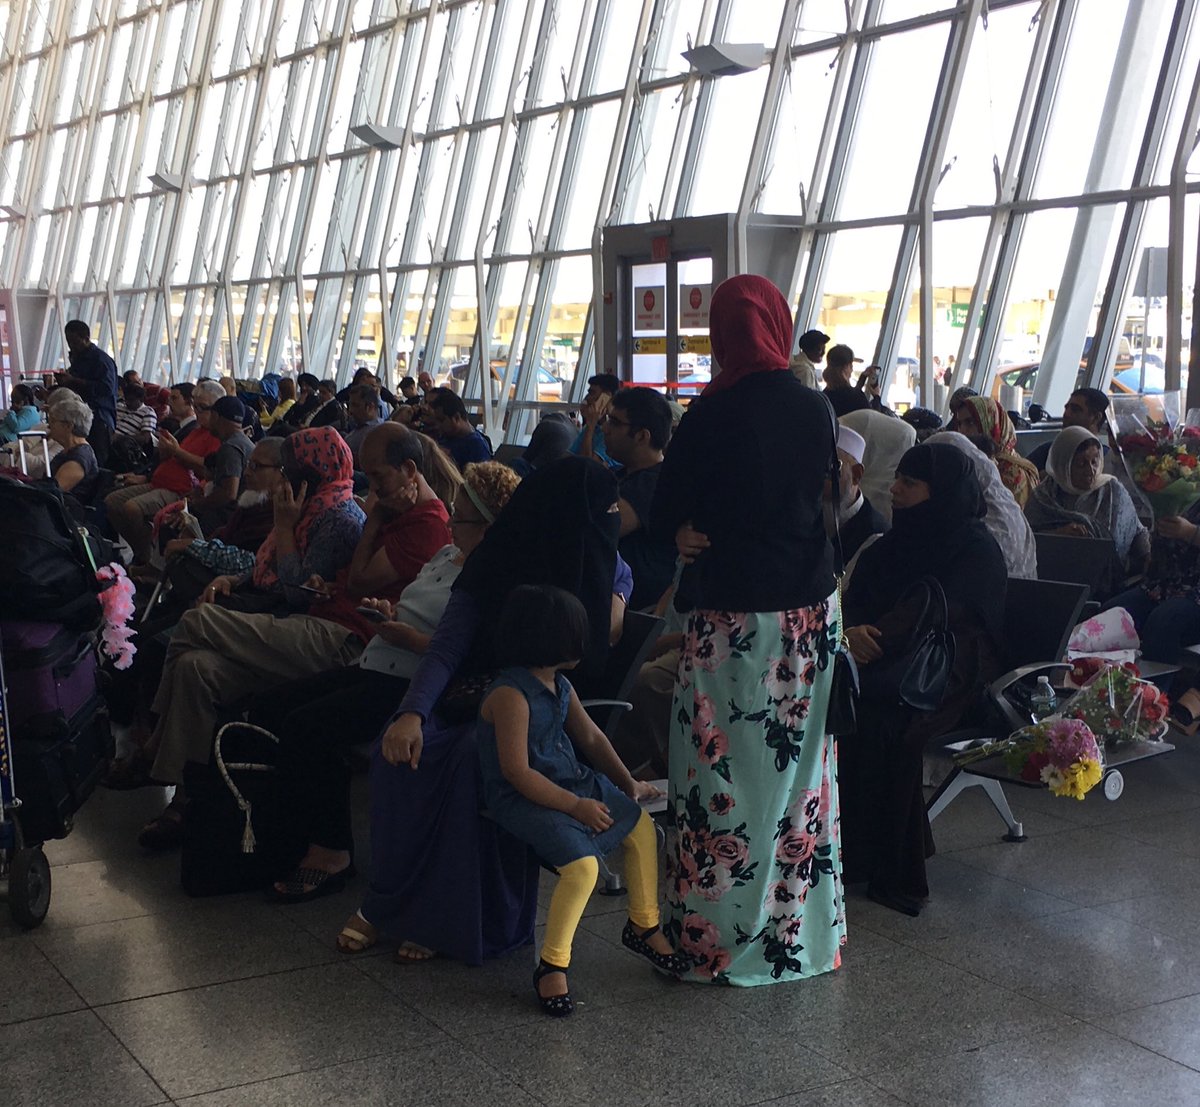 Anxious family at #JFK waiting for family to disembark quarantined #Emirates flight from #Dubai. A reported 100+ passengers got sick on the flight.